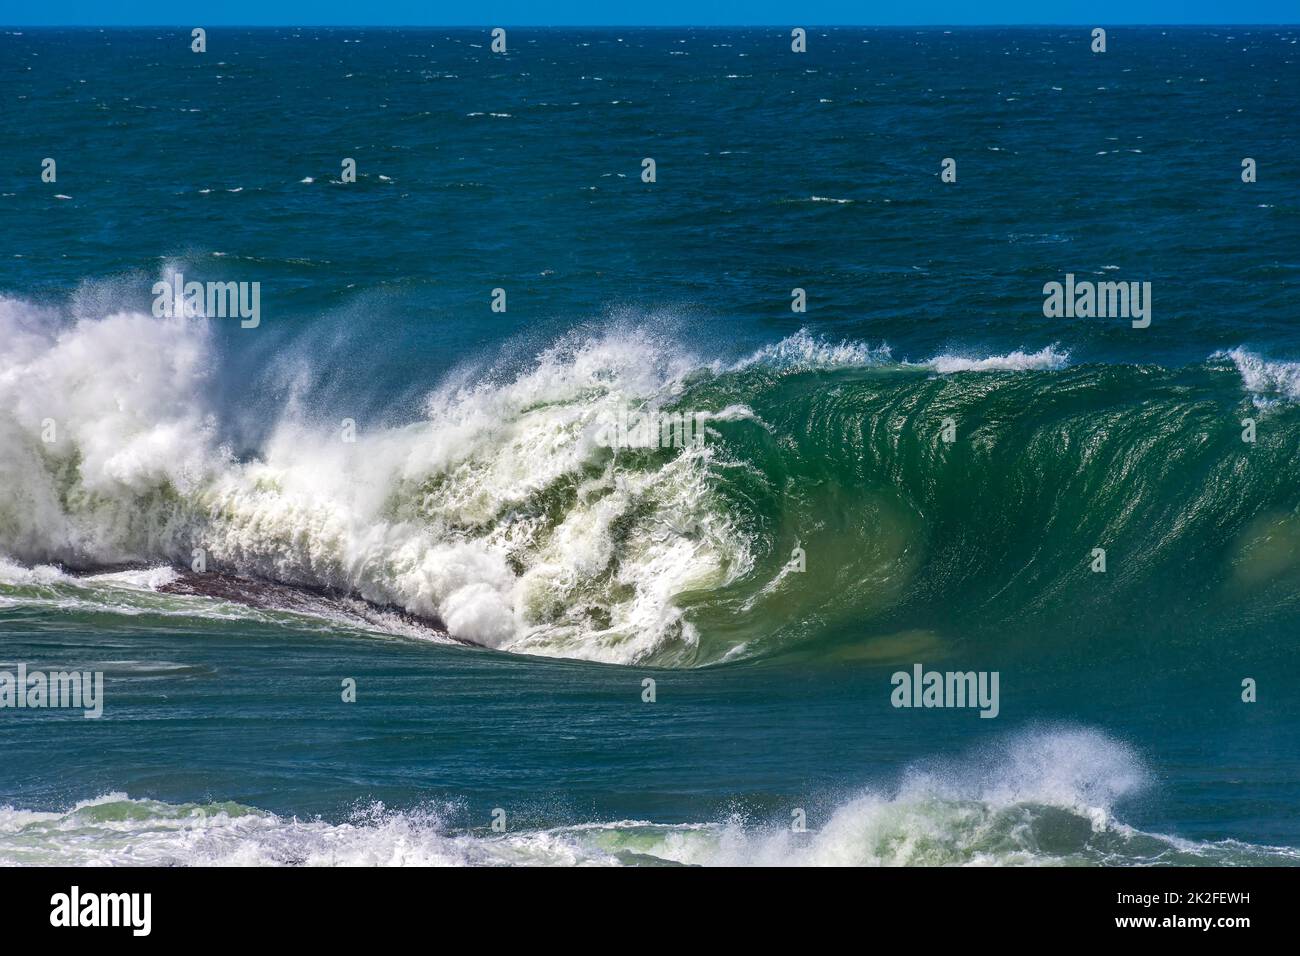 Wave breaking during stormy weather on a sunny day Stock Photo